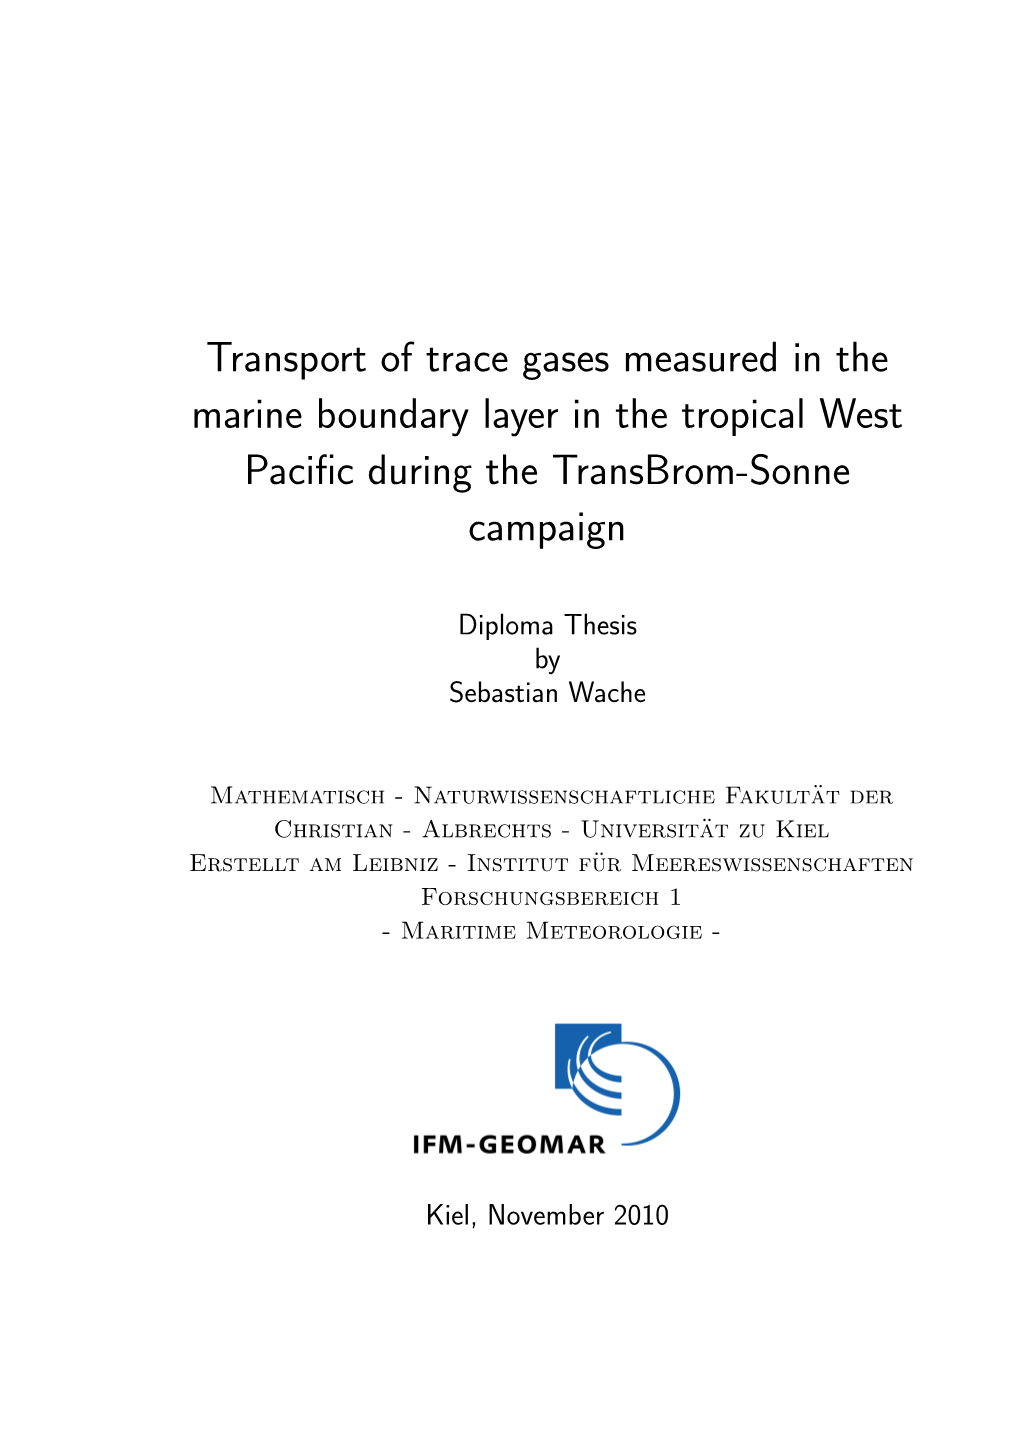 Transport of Trace Gases Measured in the Marine Boundary Layer in the Tropical West Paciﬁc During the Transbrom-Sonne Campaign